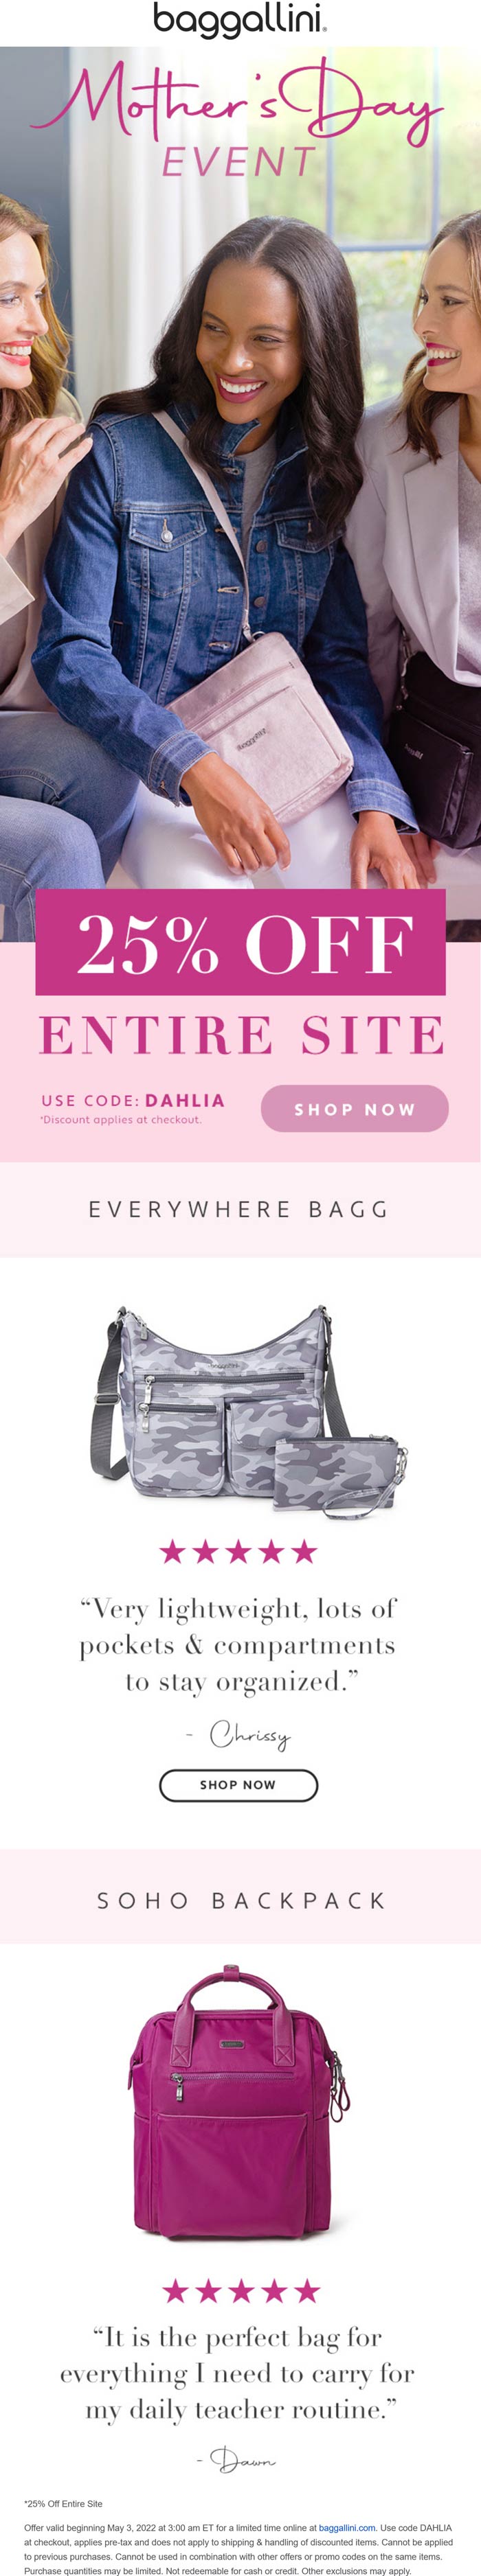 Baggallini stores Coupon  25% off everything online at Baggallini via promo code DAHLIA #baggallini 